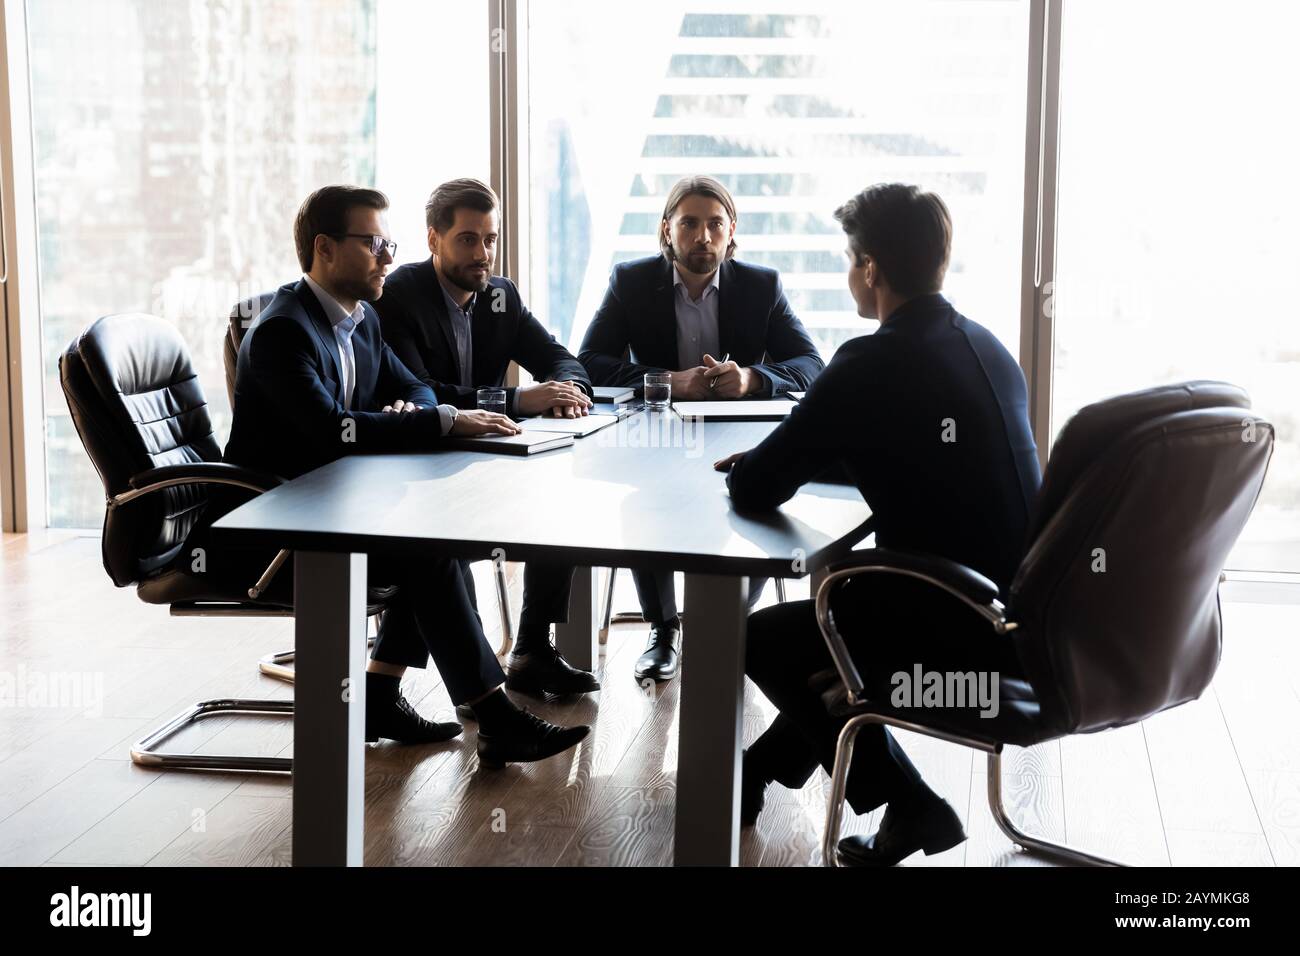 Applicant sitting in front three serious HR businessmen speaking. Stock Photo